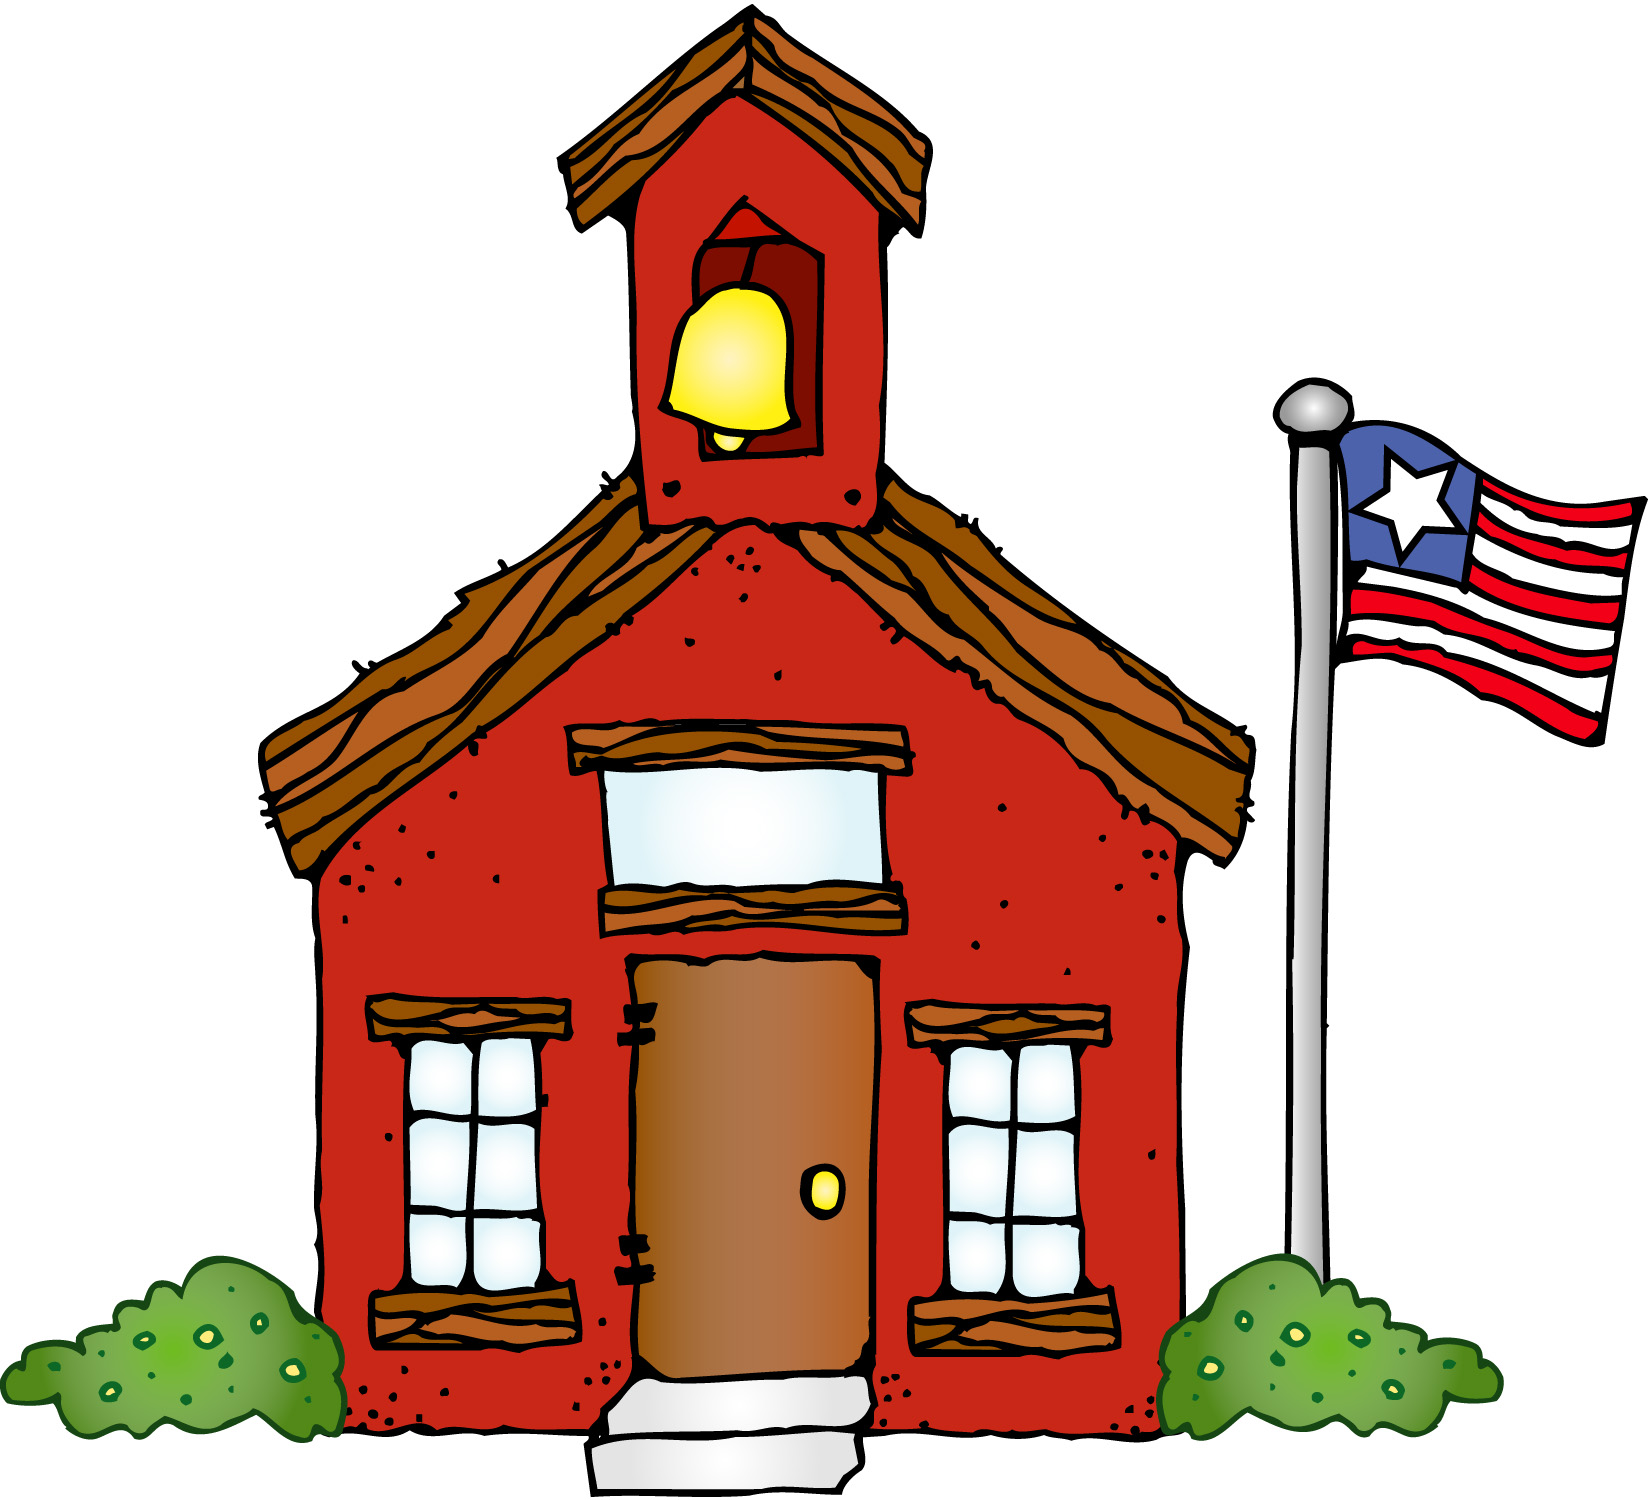 School House Clipart Free | Clipart Panda - Free Clipart Images